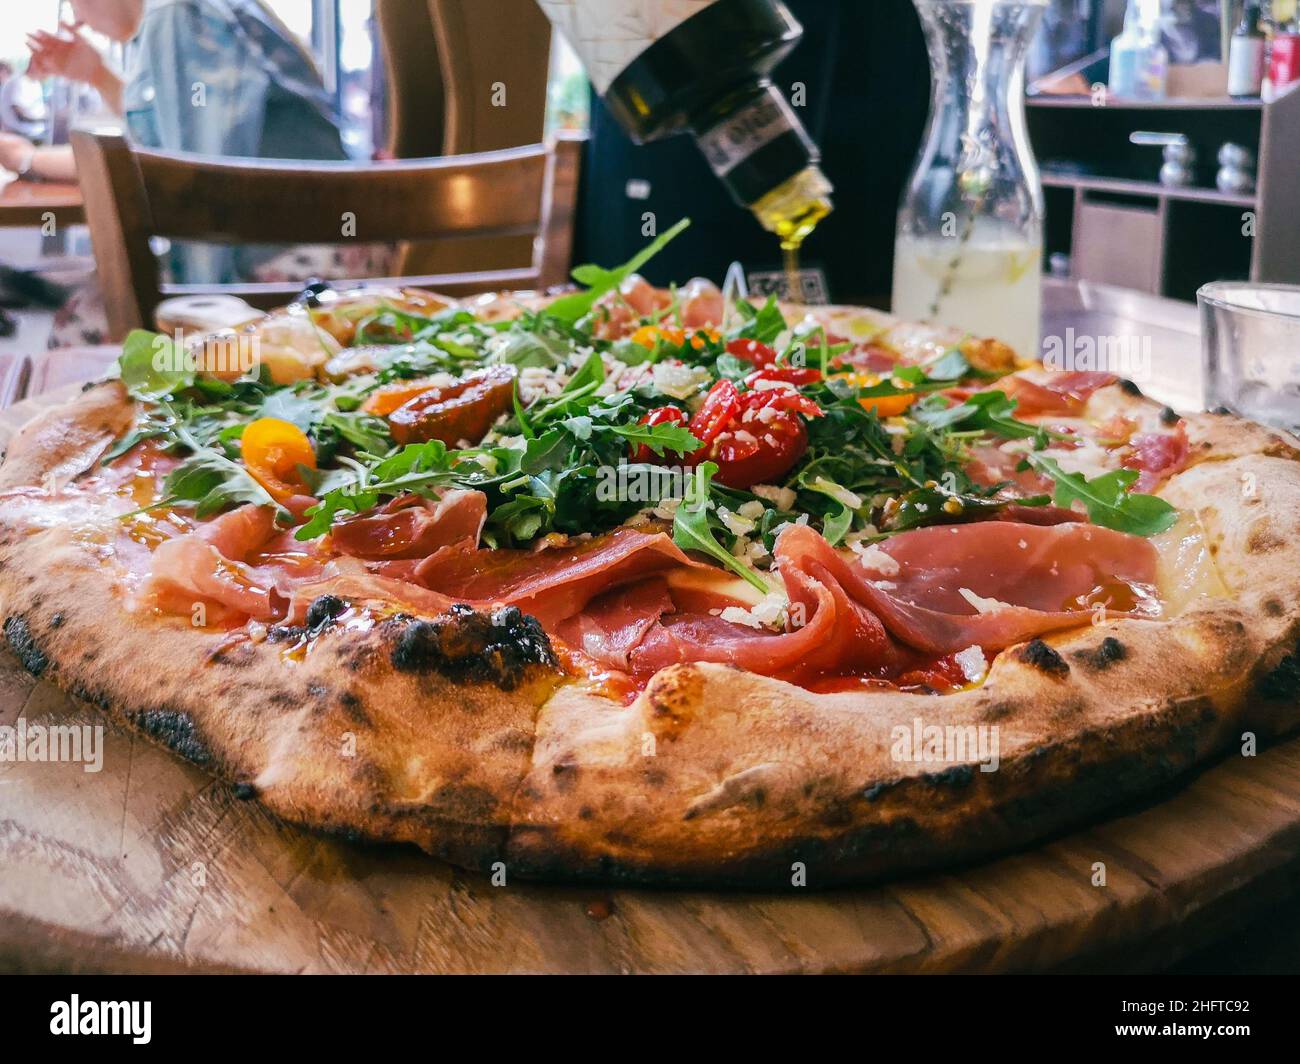 Close-up view of pouring olive oil on a pizza in a cafÃ© Stock Photo